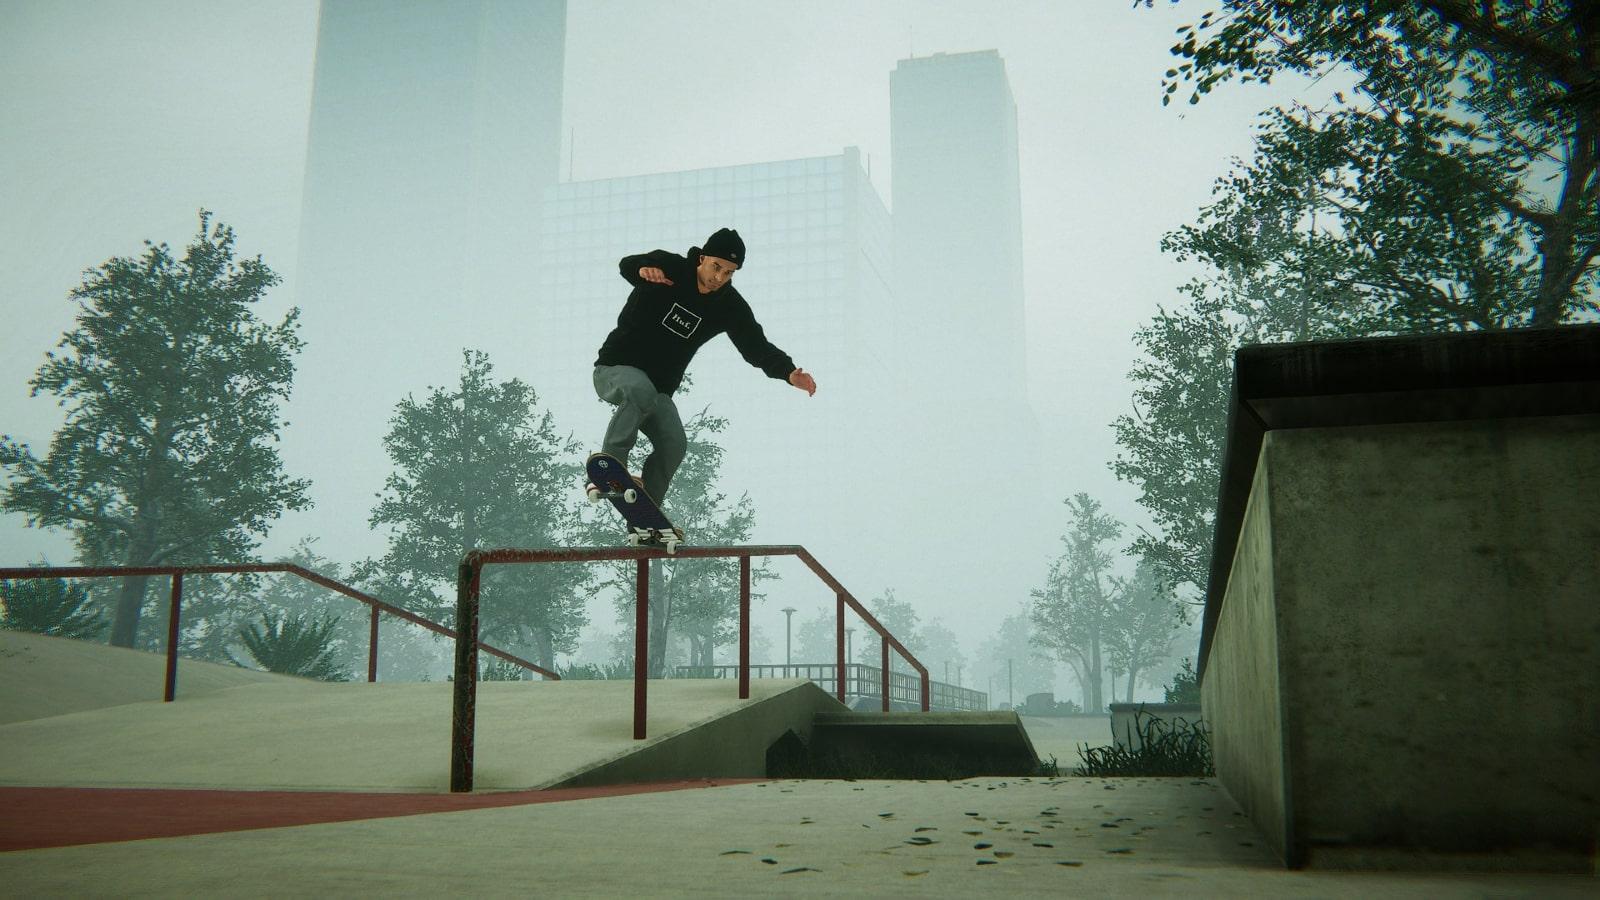 Skate 3 on PC: How to Download & Play Easily